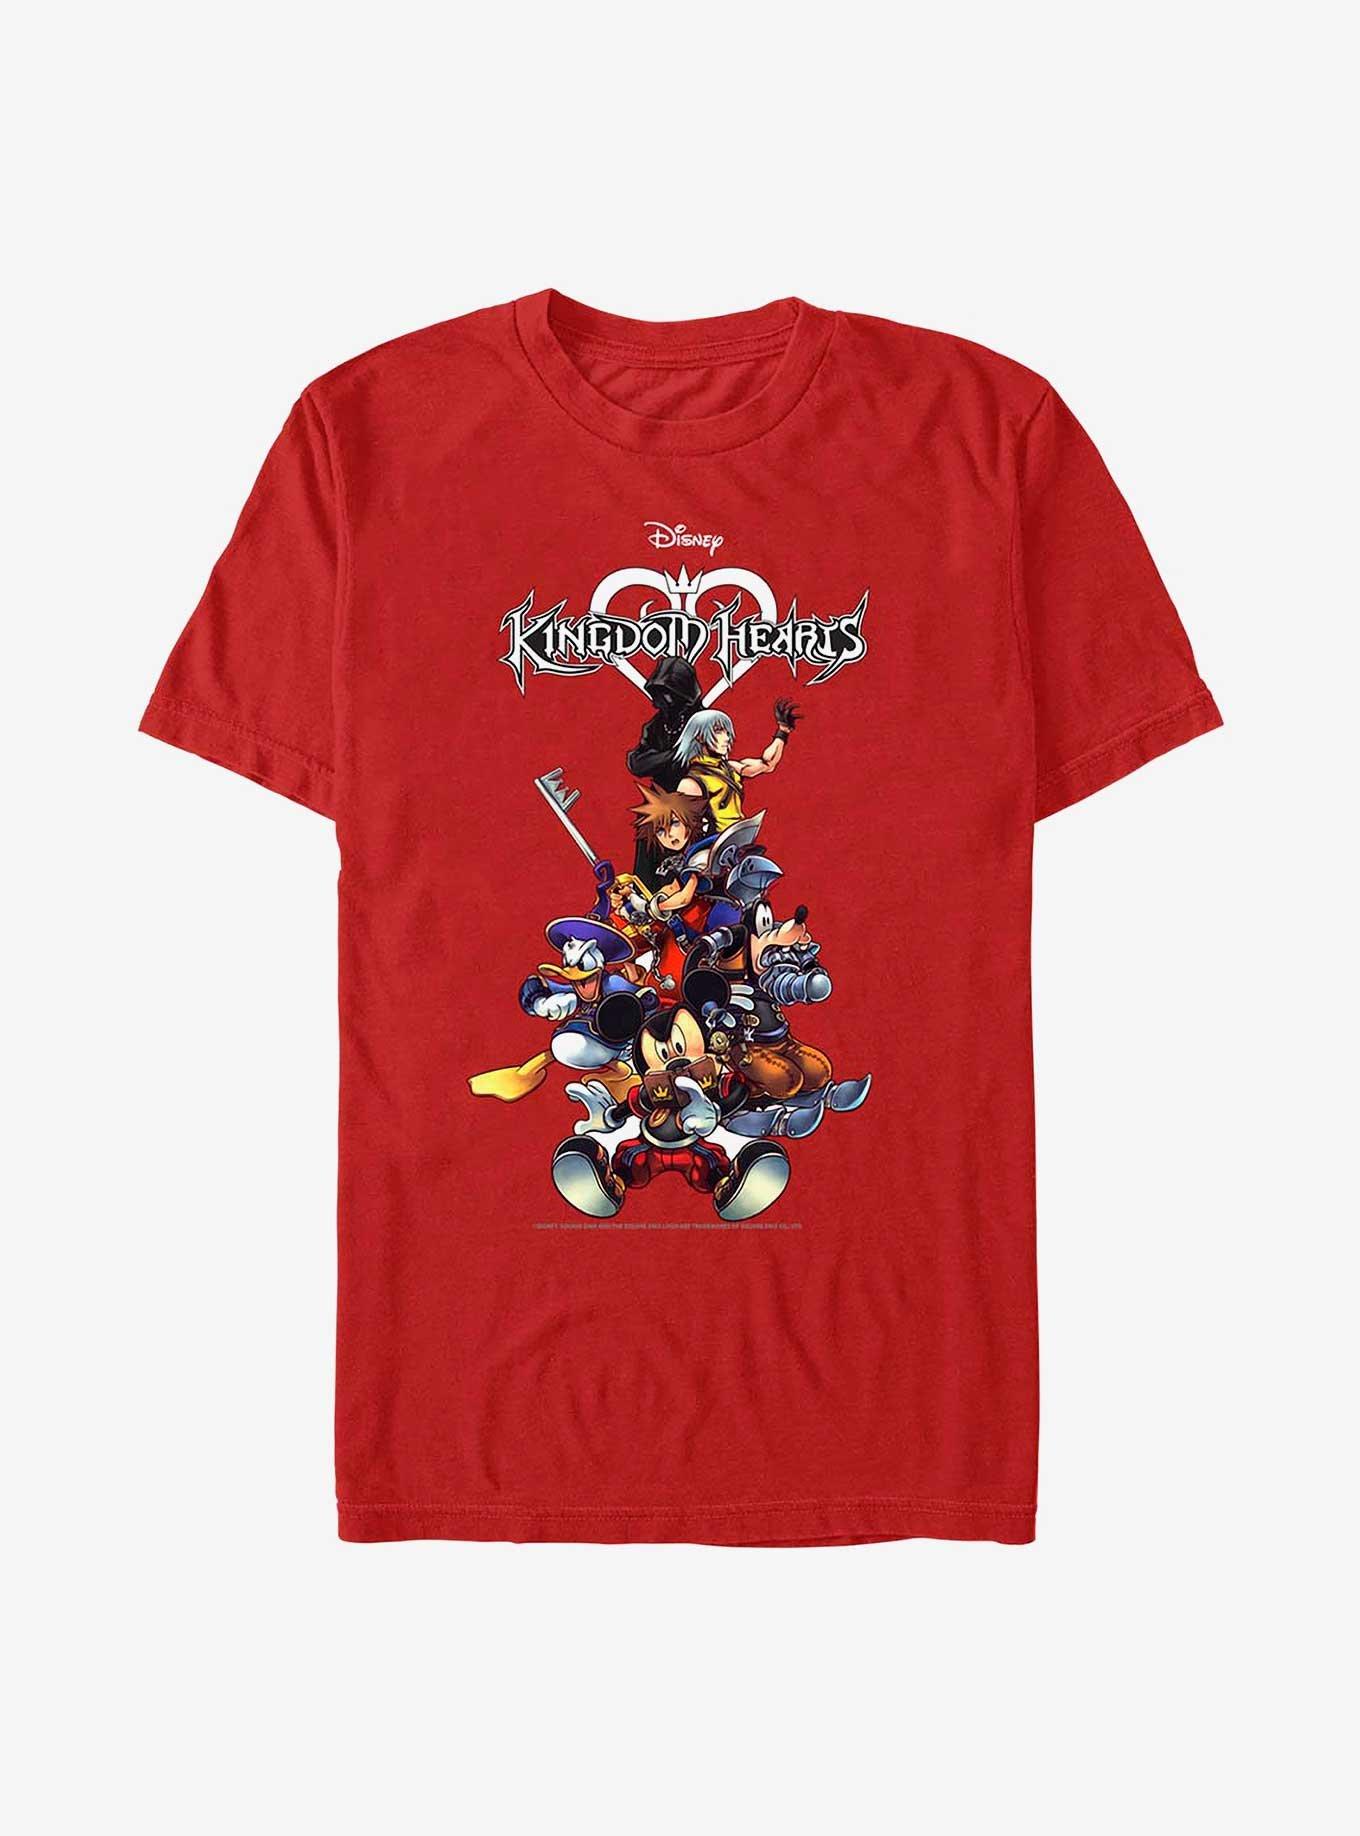 Disney Kingdom Hearts Group With Logo T-Shirt, RED, hi-res